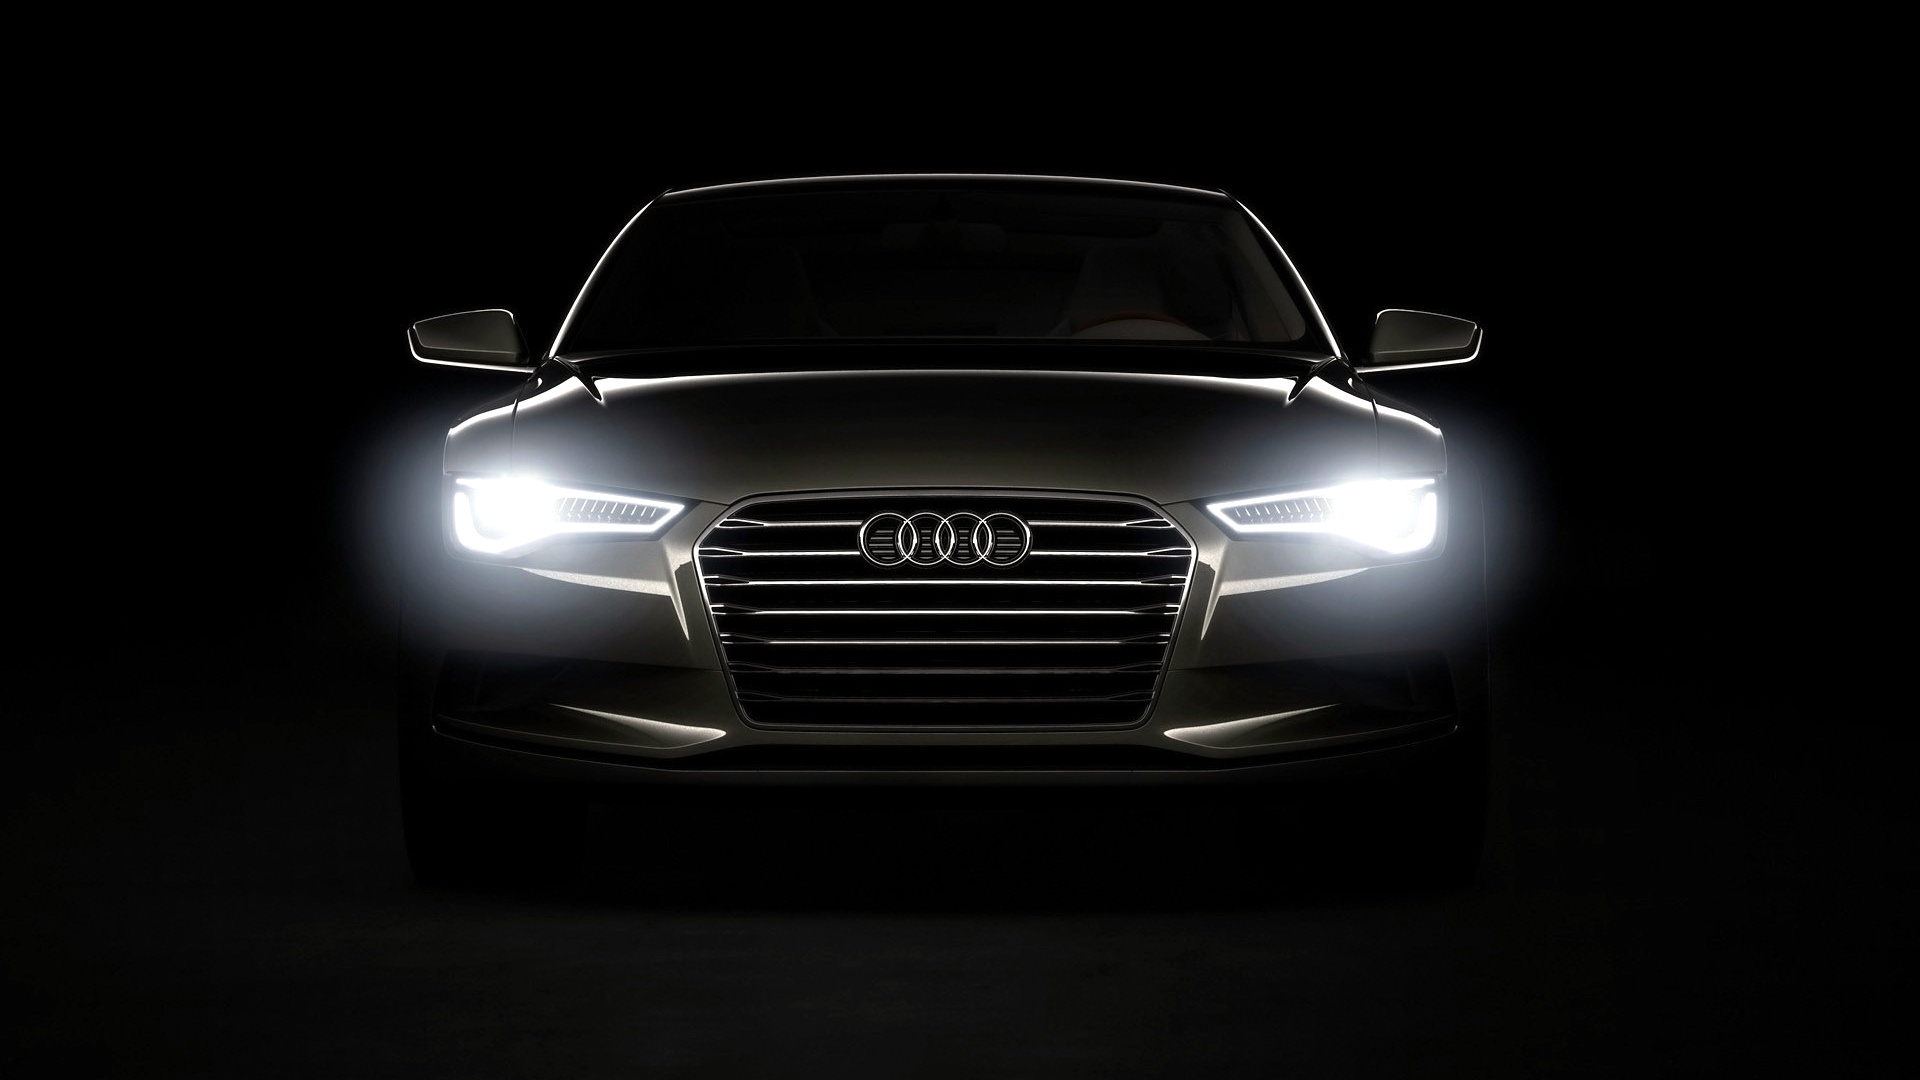 Audi Hd wallpapers backgrounds your desktop Audi cars wallpapers are 1920x1080